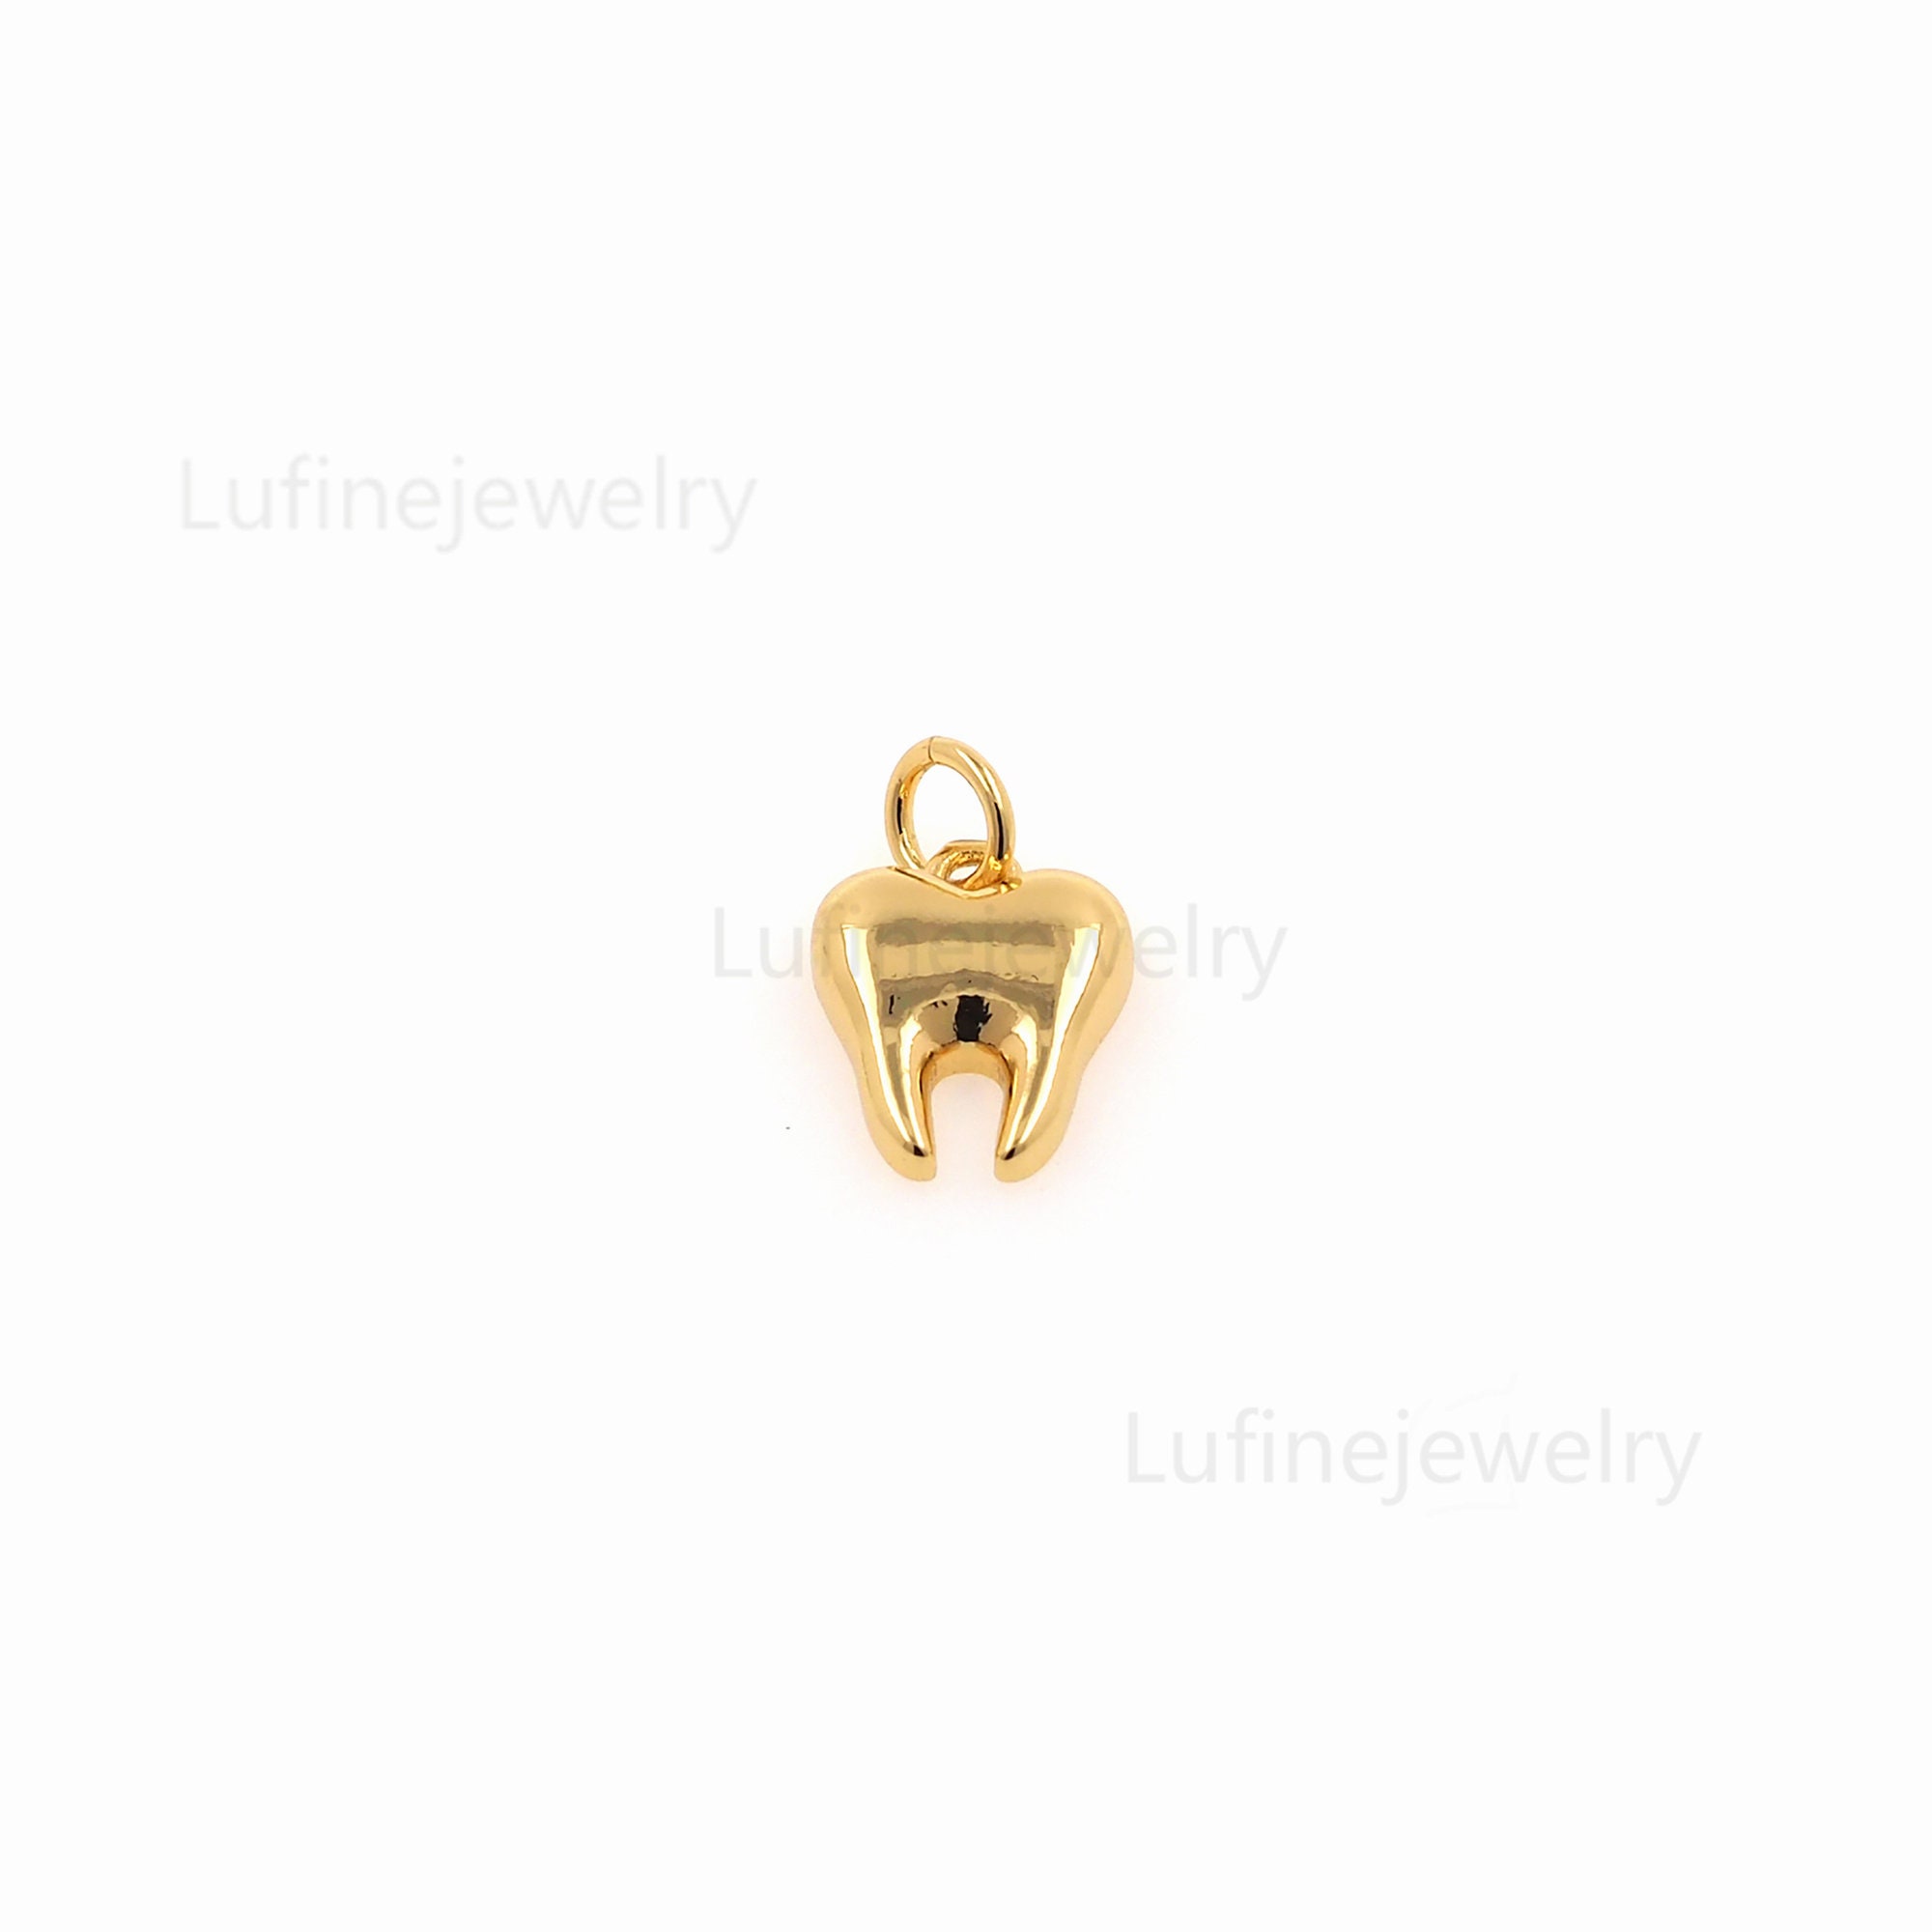 Gold Tooth Gem 18ct - Louis Vuitton - dental jewelry